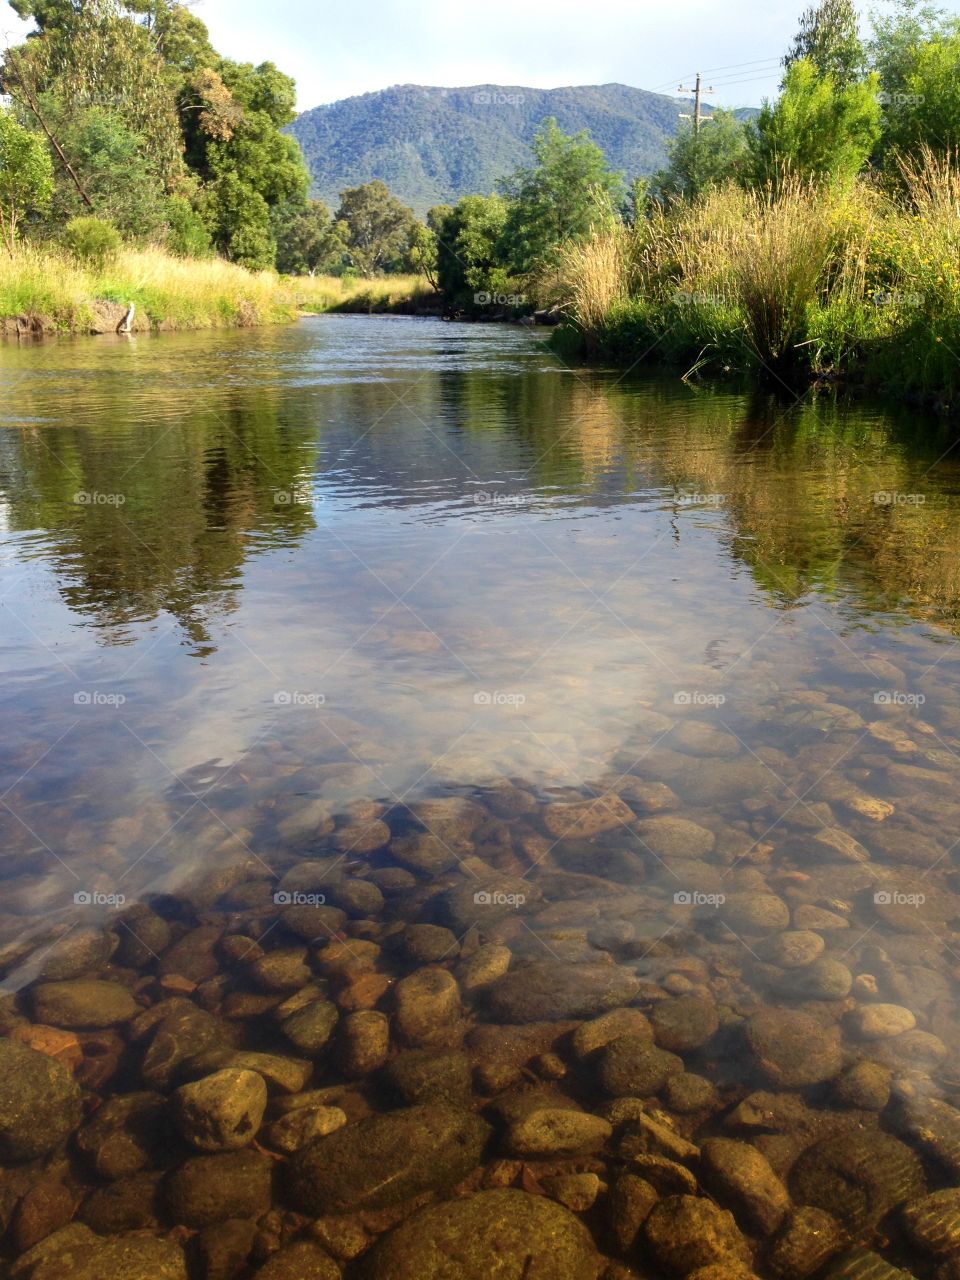 Crystal clear water of the Rubicon River